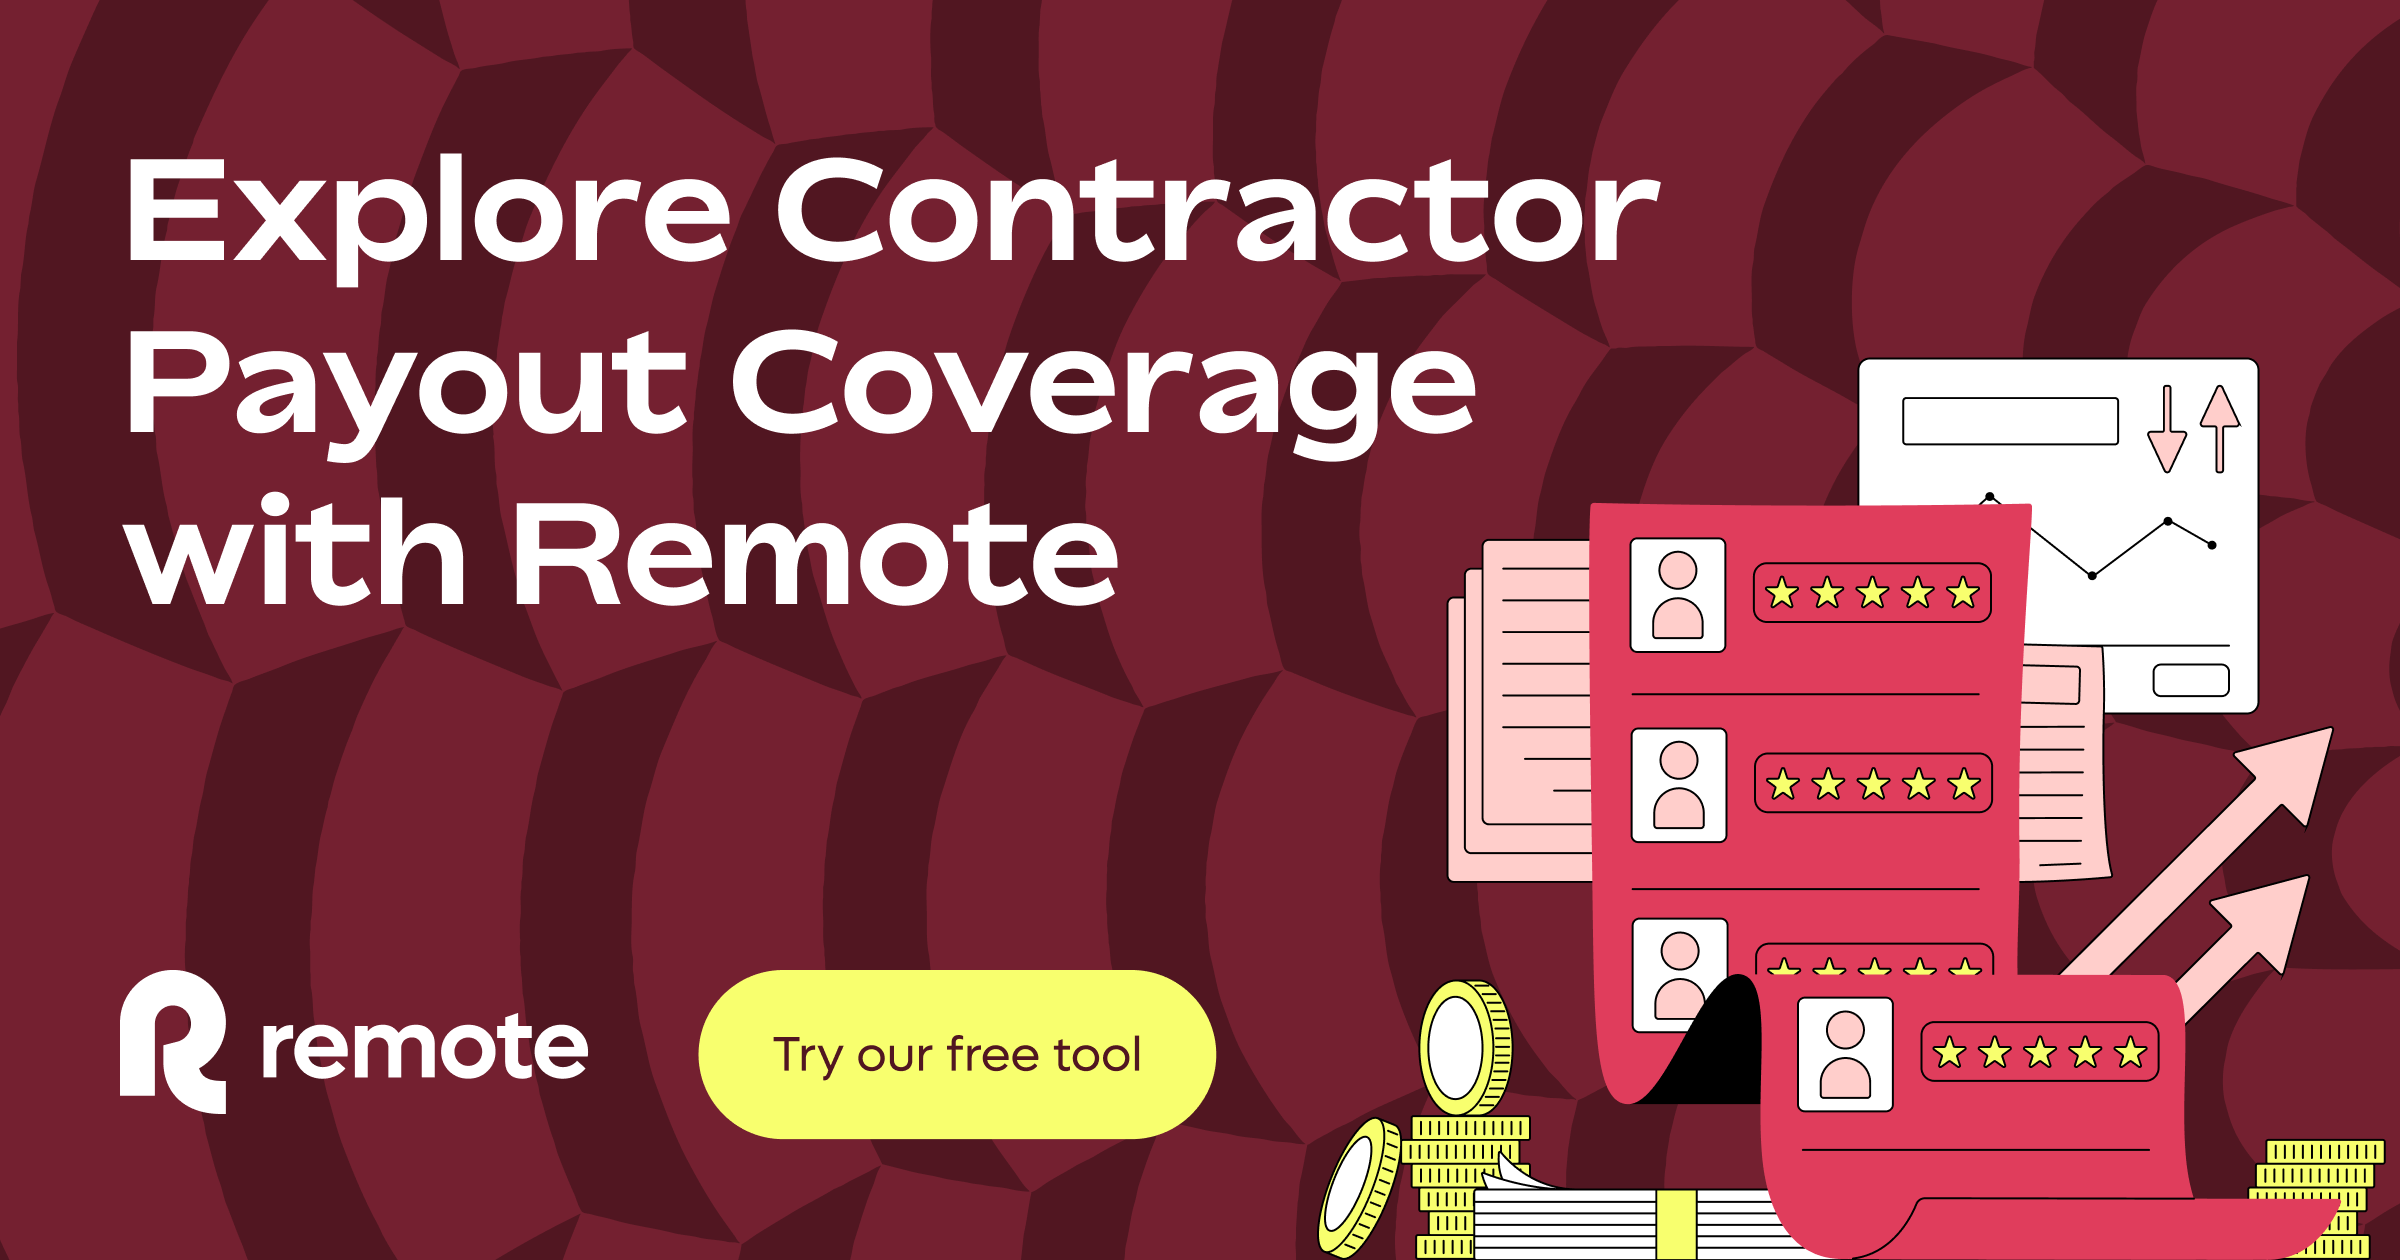 Explore contractor payout coverage with remote.